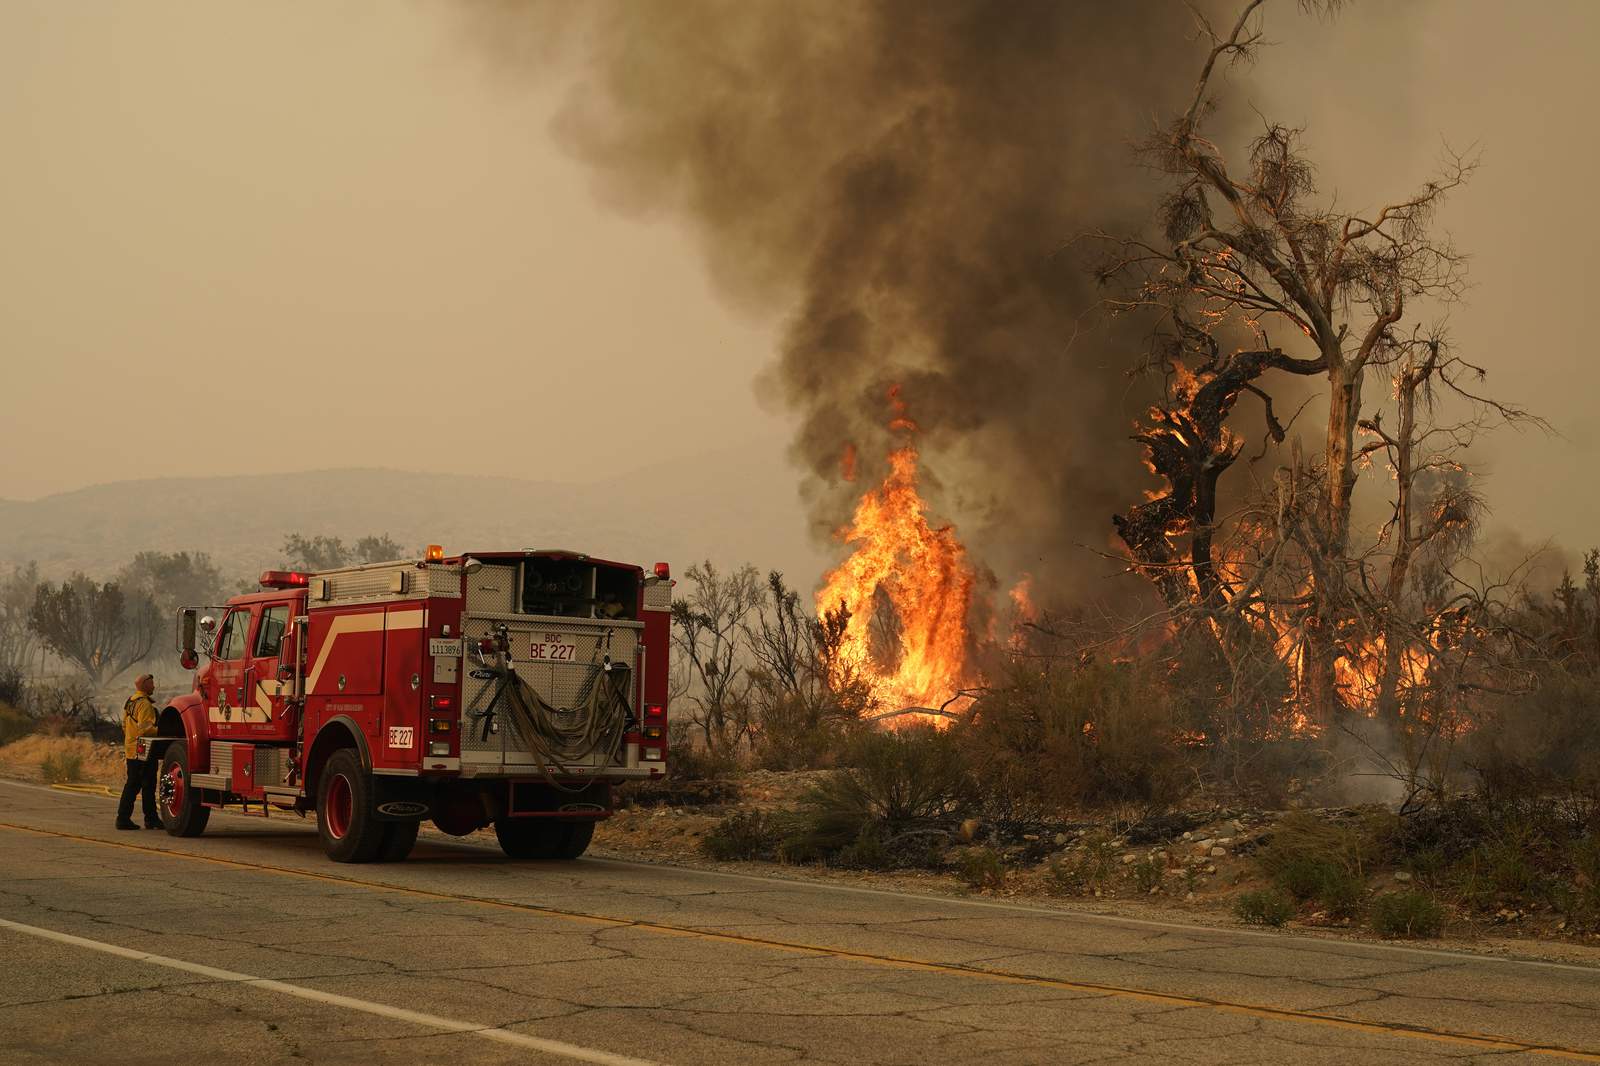 Desert communities told to evacuate as winds stoke flames